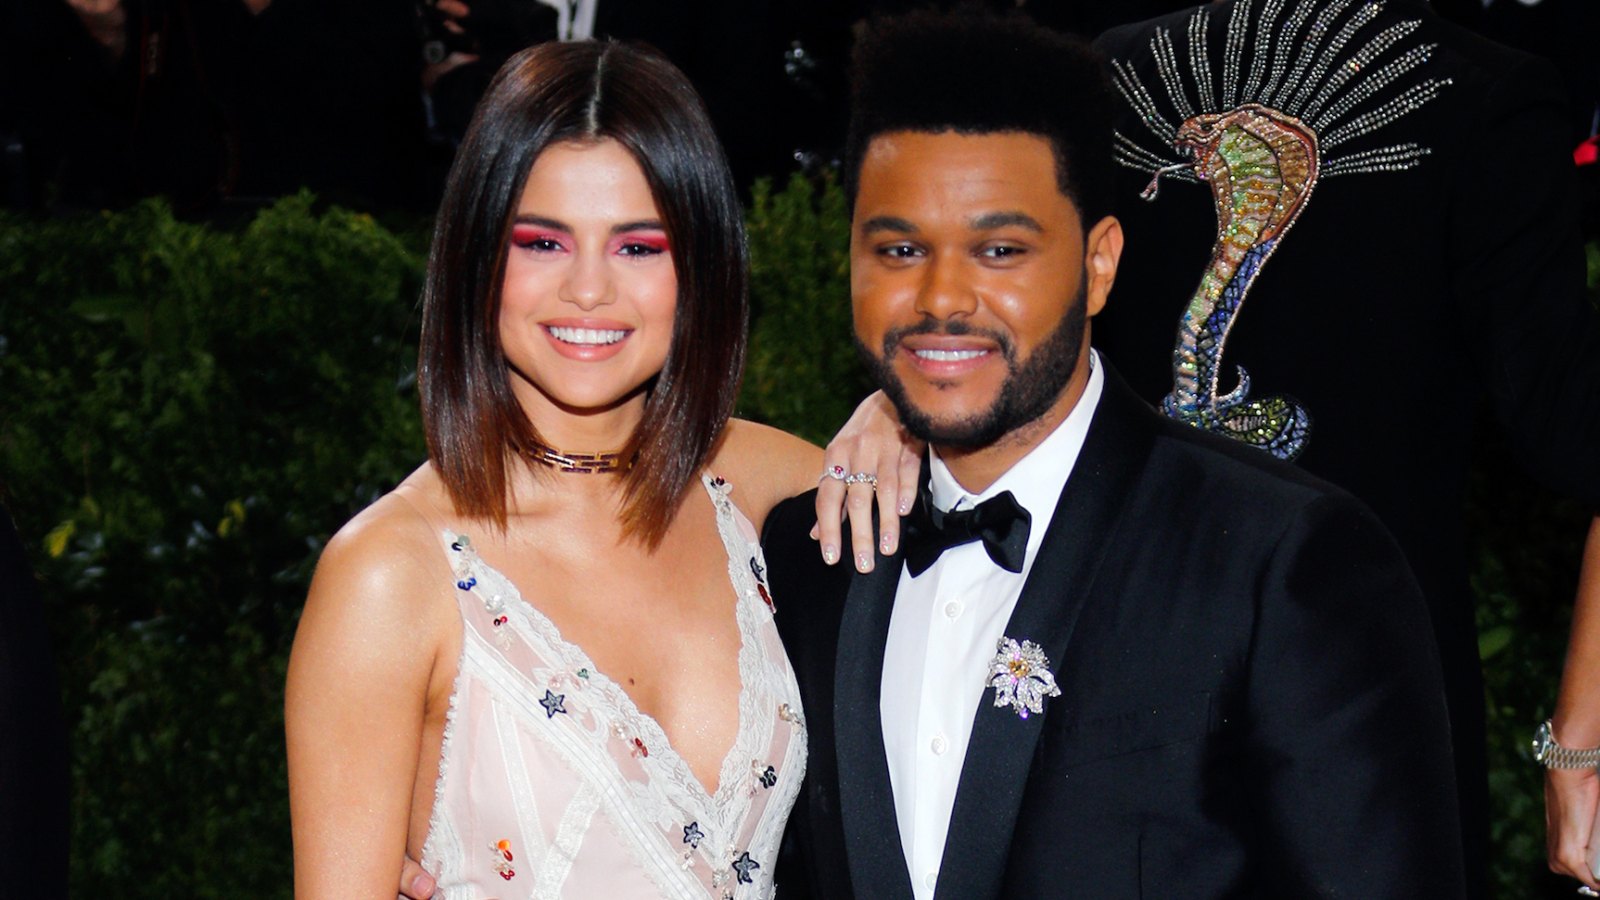 Selena Gomez Cuddles Up With The Weeknd While He Plays Video Games